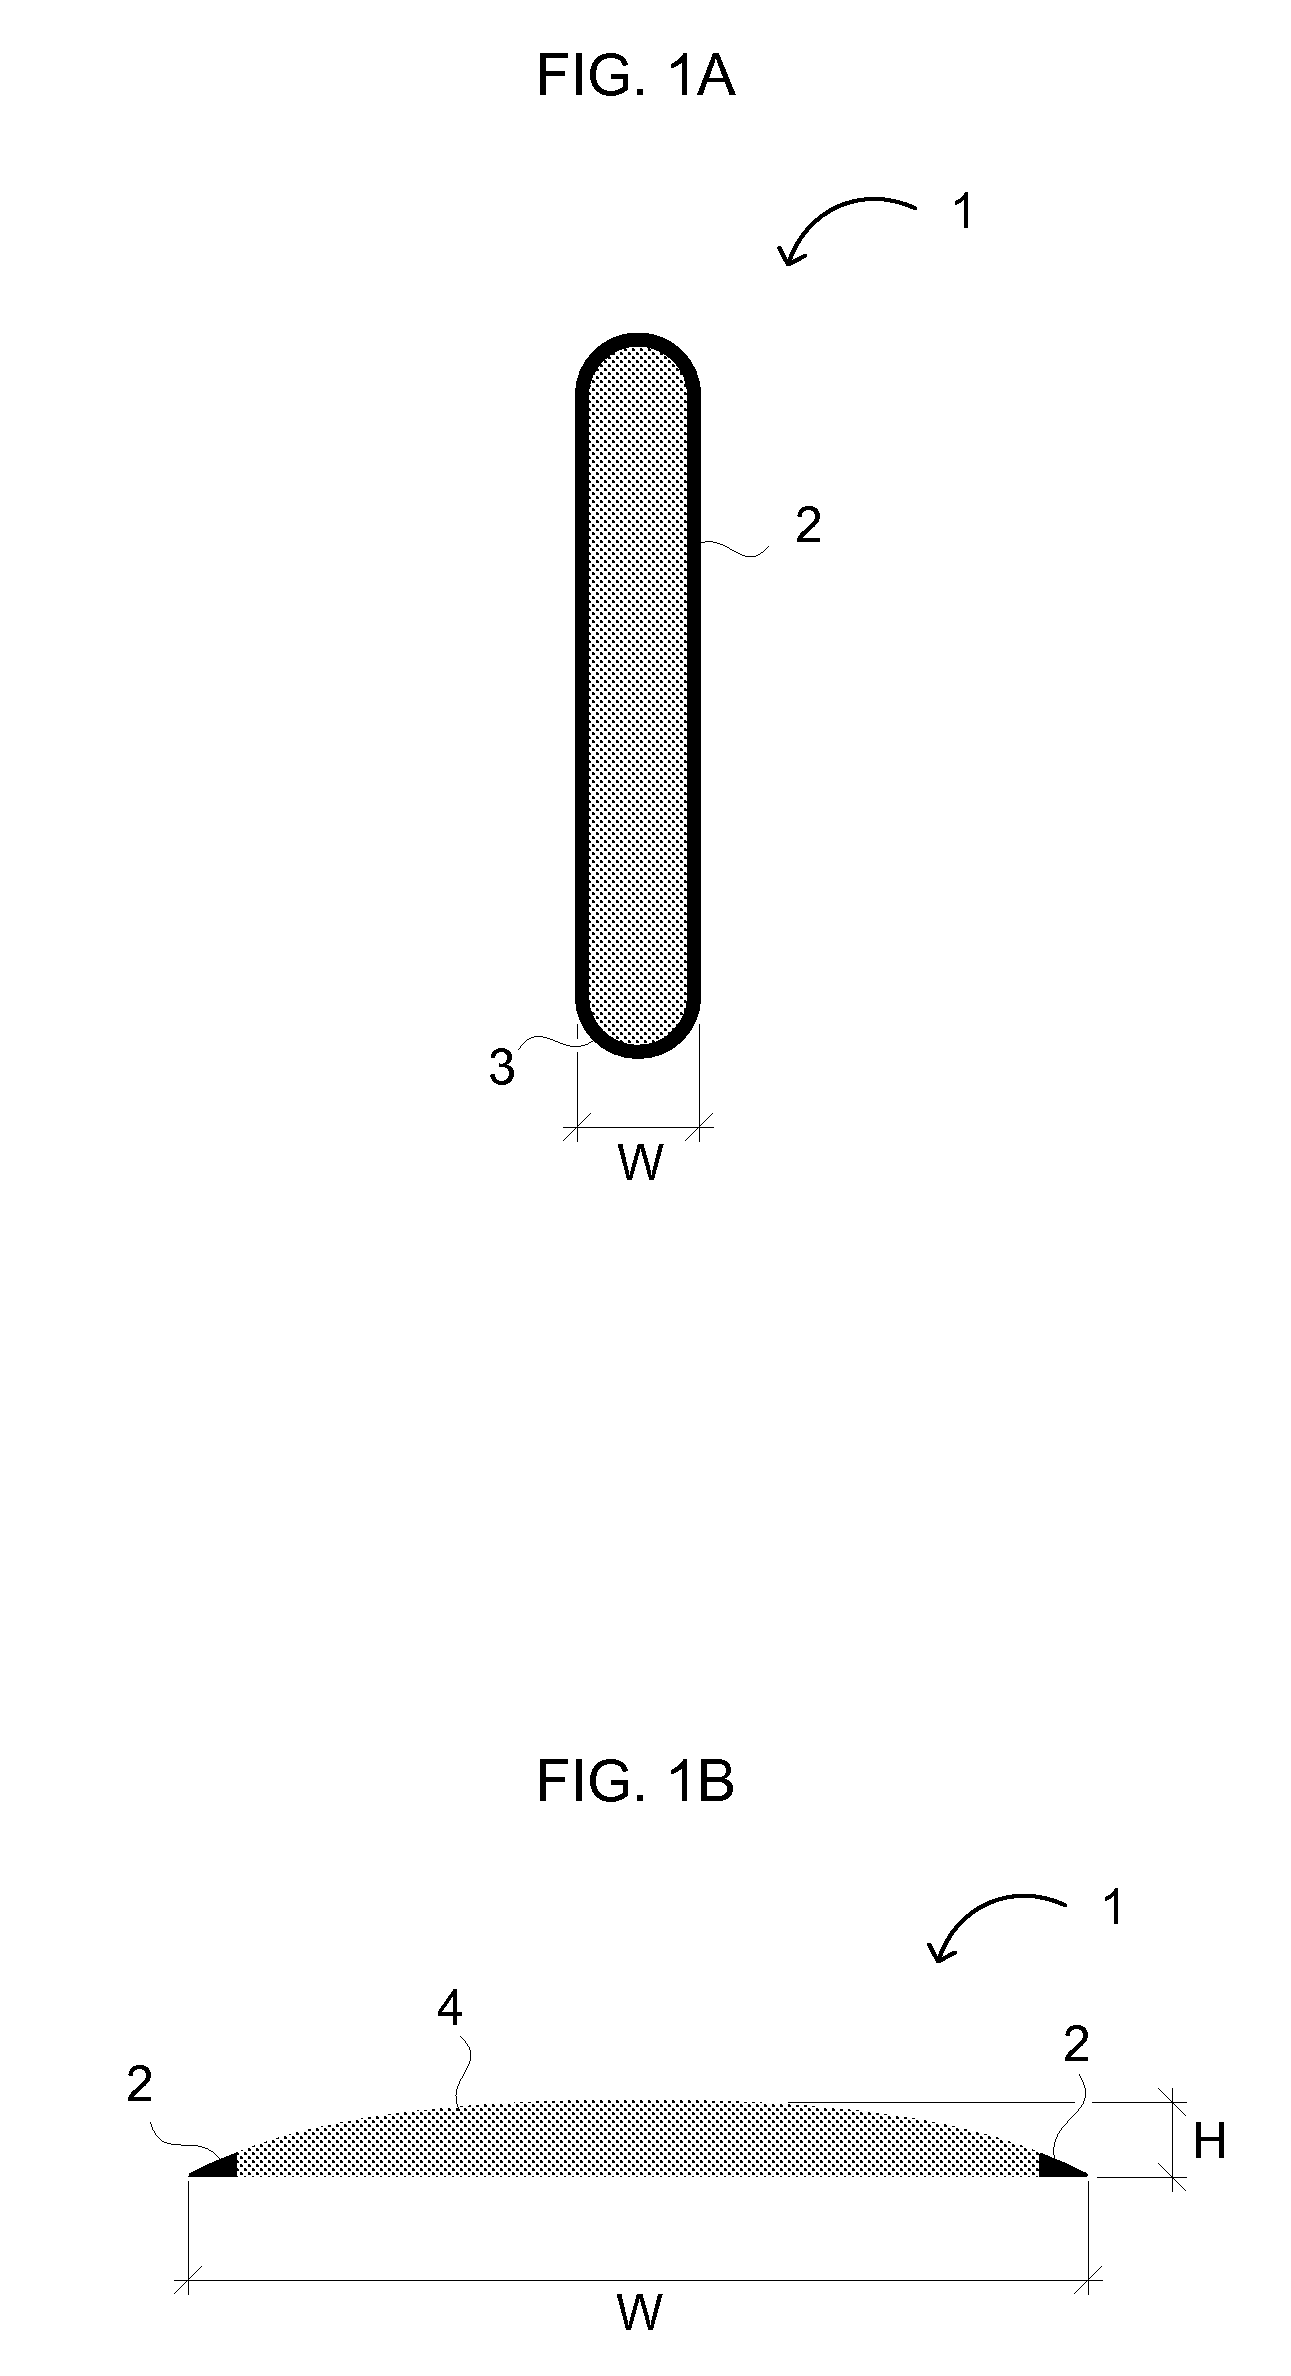 Print processing for patterned conductor, semiconductor and dielectric materials